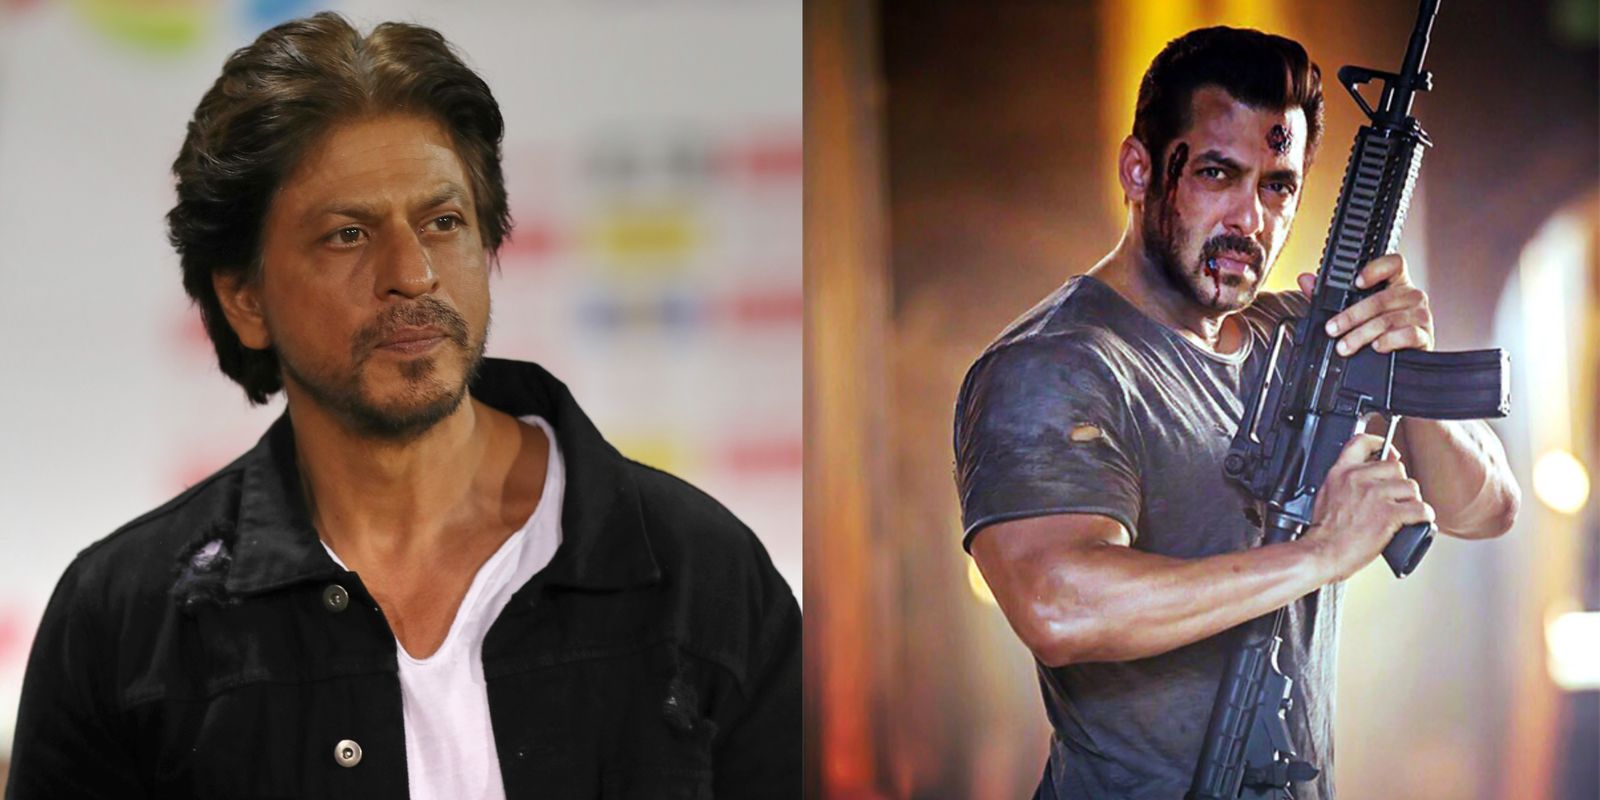 Pathan: Shah Rukh Khan's Upcoming Film To Have Salman Khan's Appearance As Tiger? Read Details...